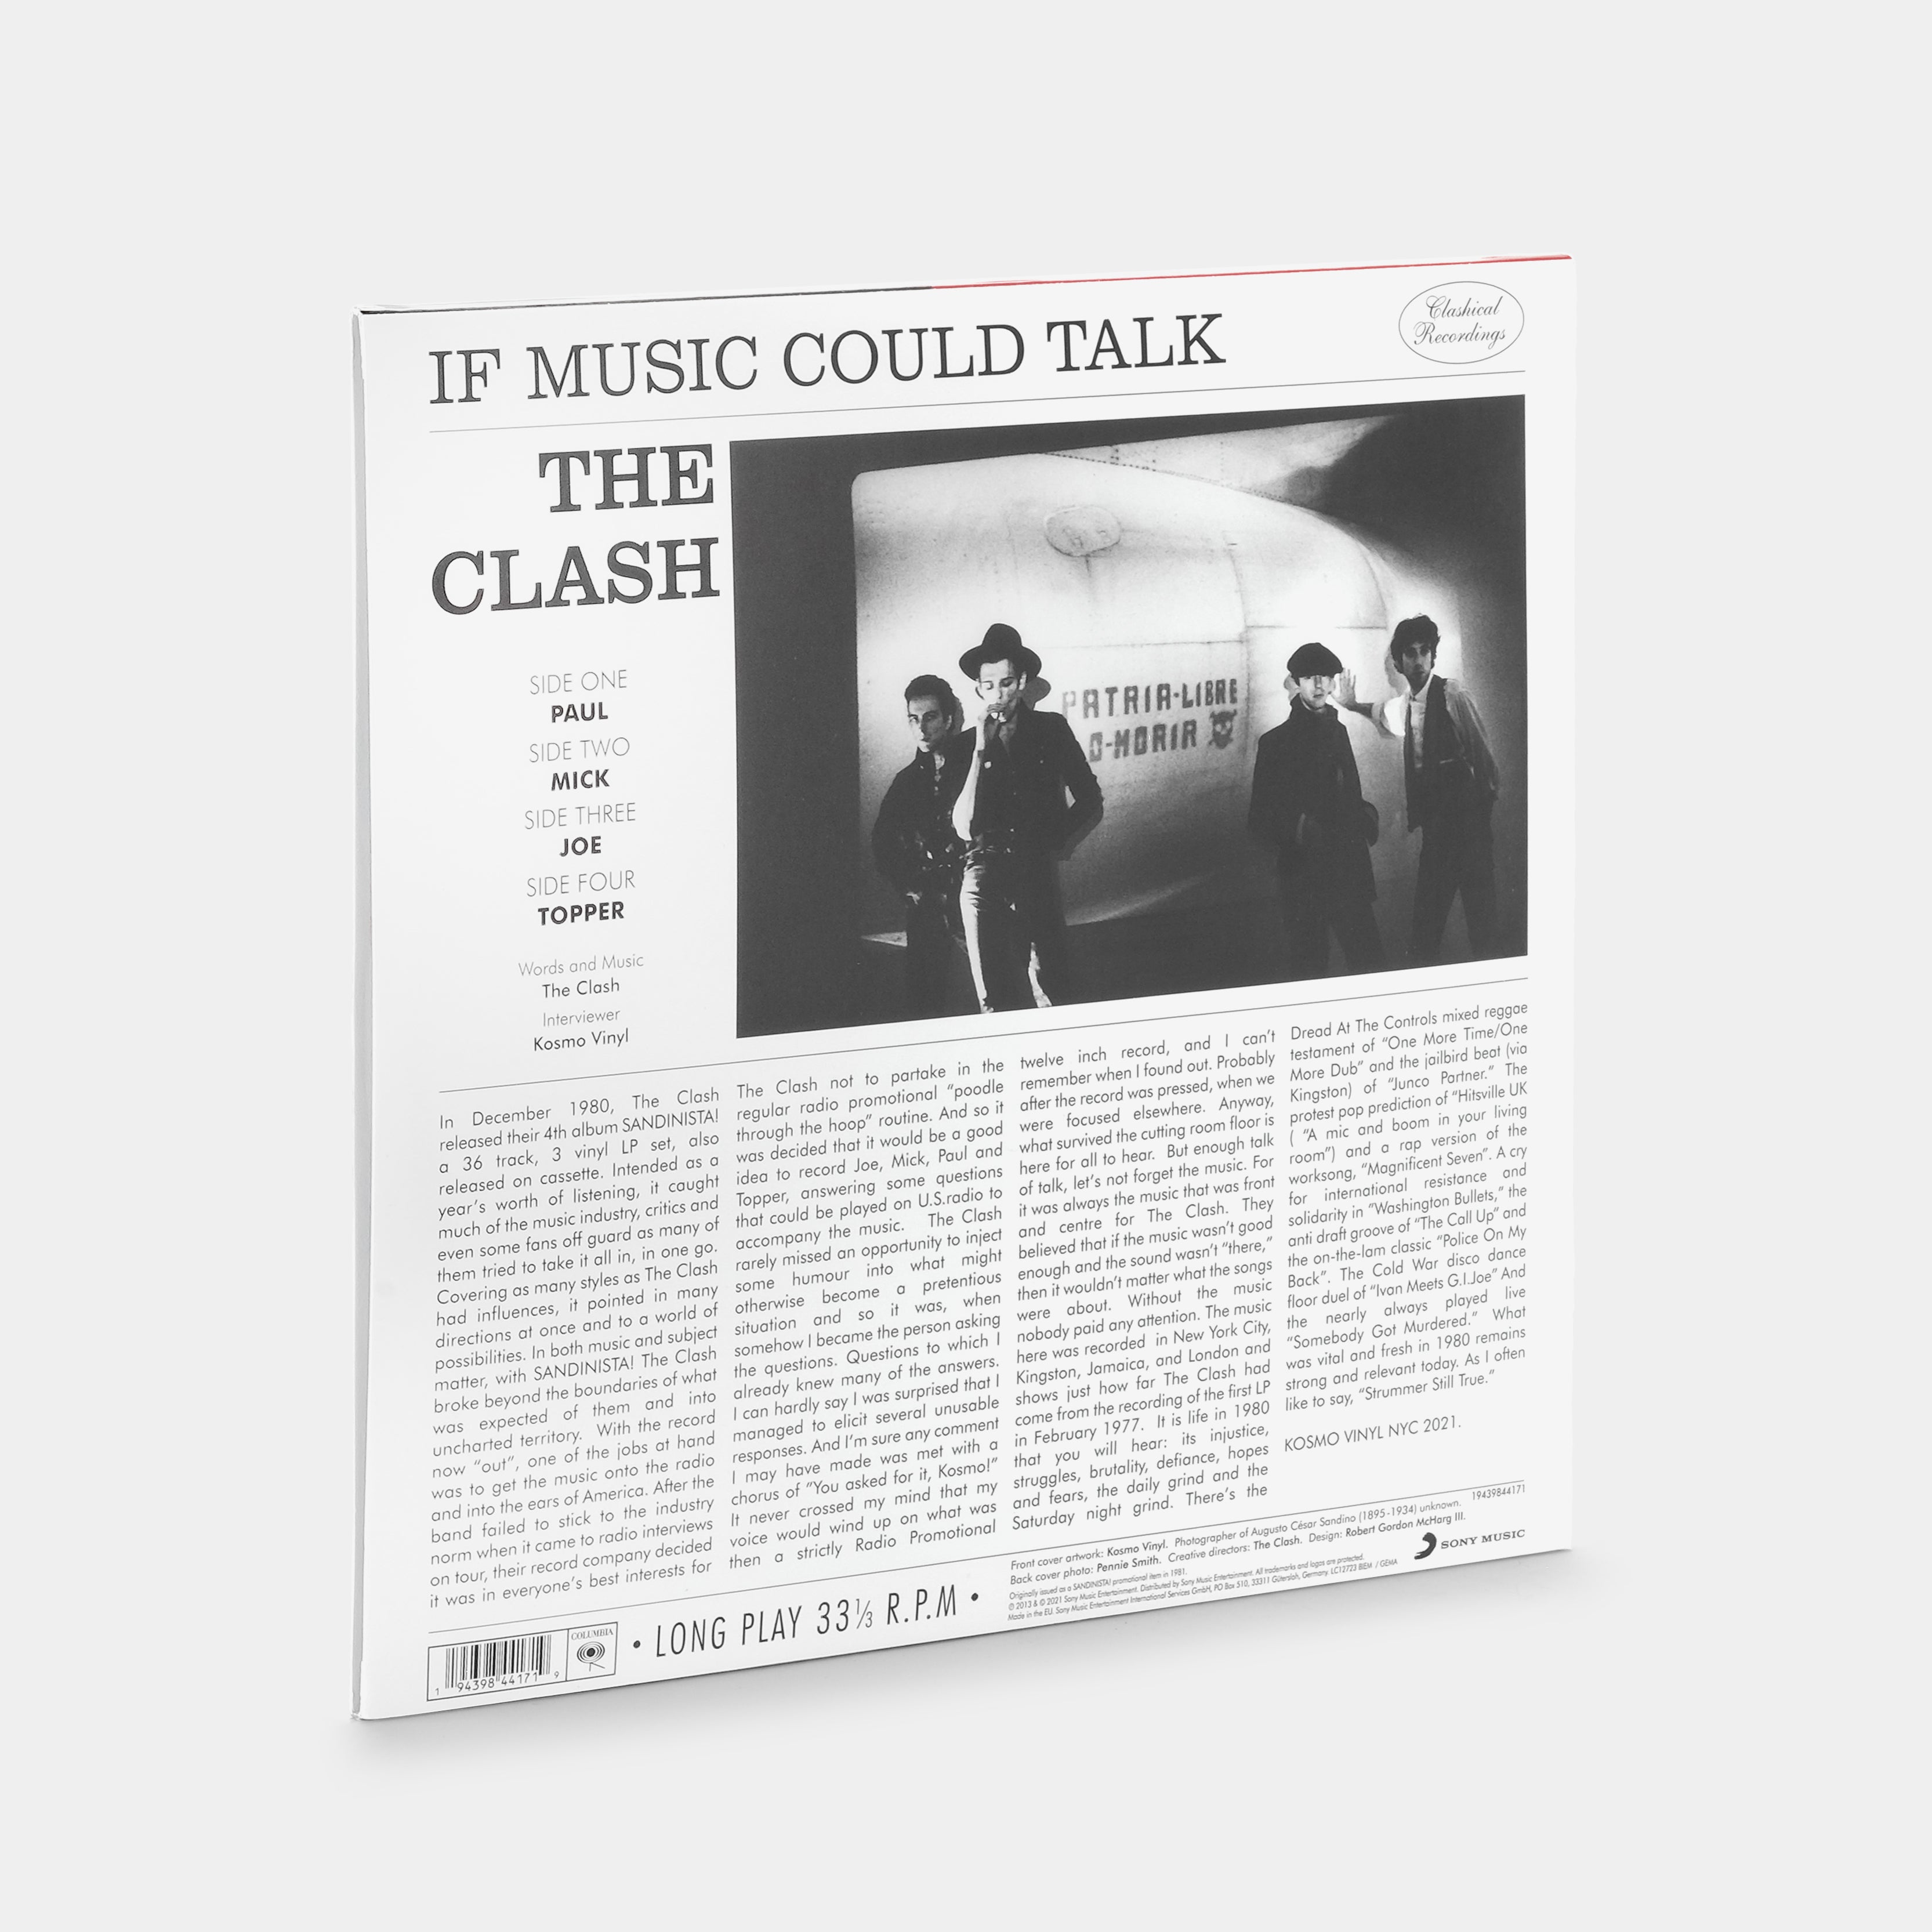 The Clash - If Music Could Talk 2xLP Vinyl Record